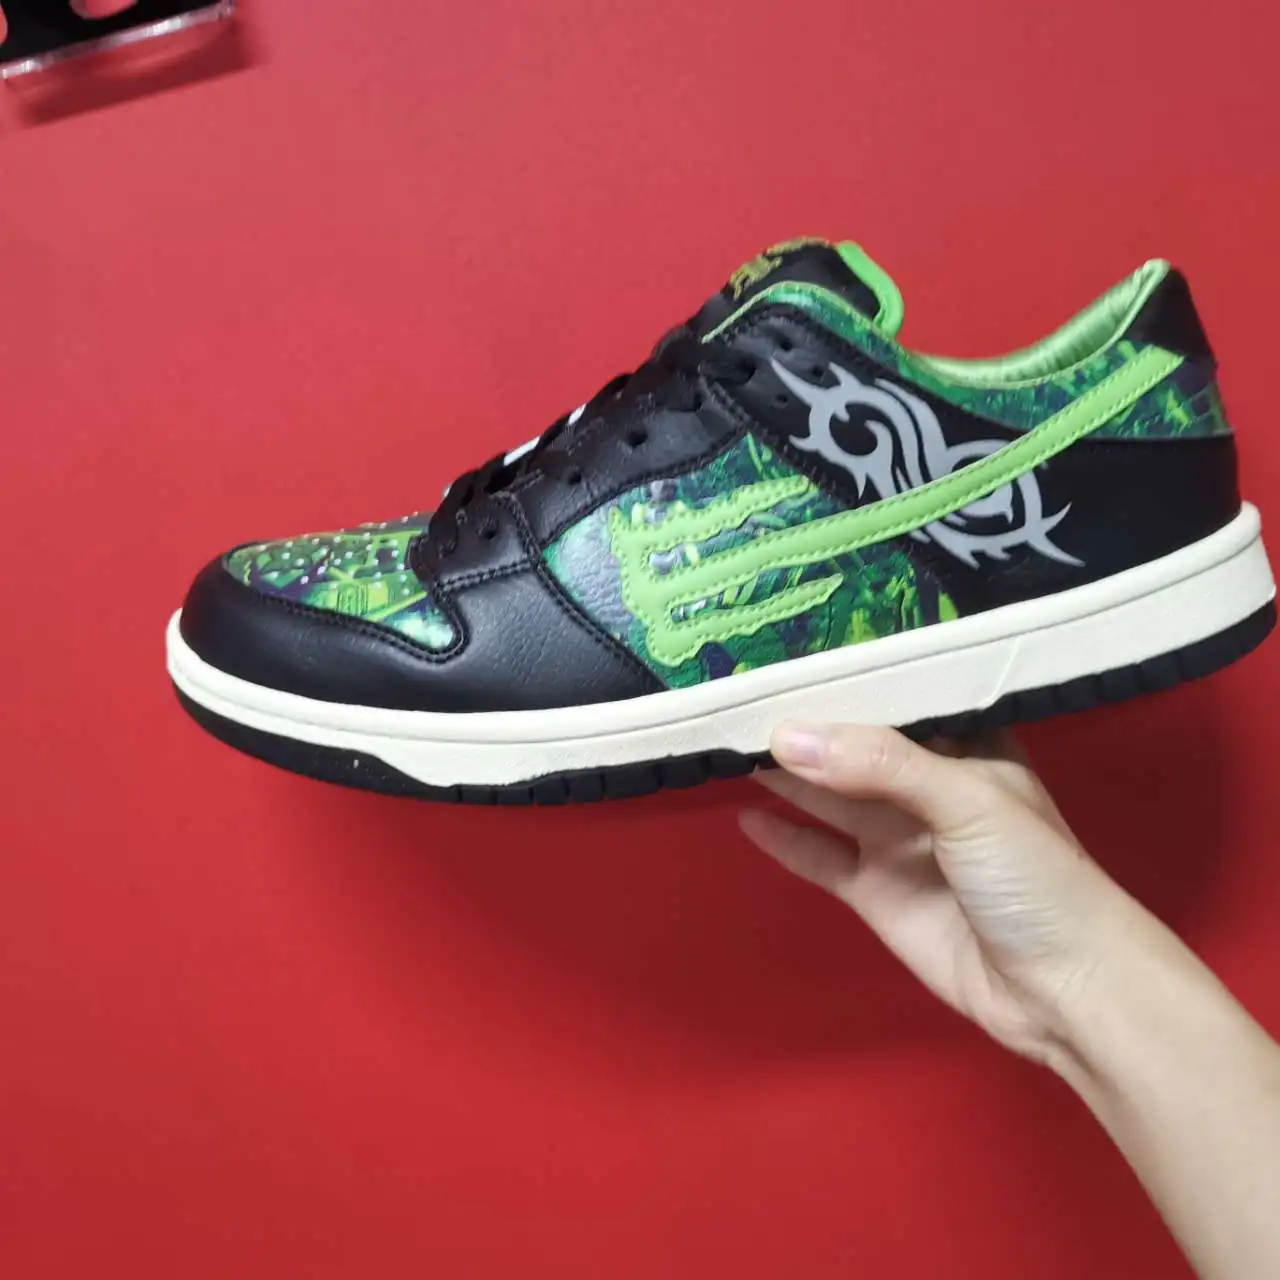 

Sell Well Amazon High Quality Customized Sneakers Logo Design SB Dunks Men's Fashion Sneakers Women, Customized color